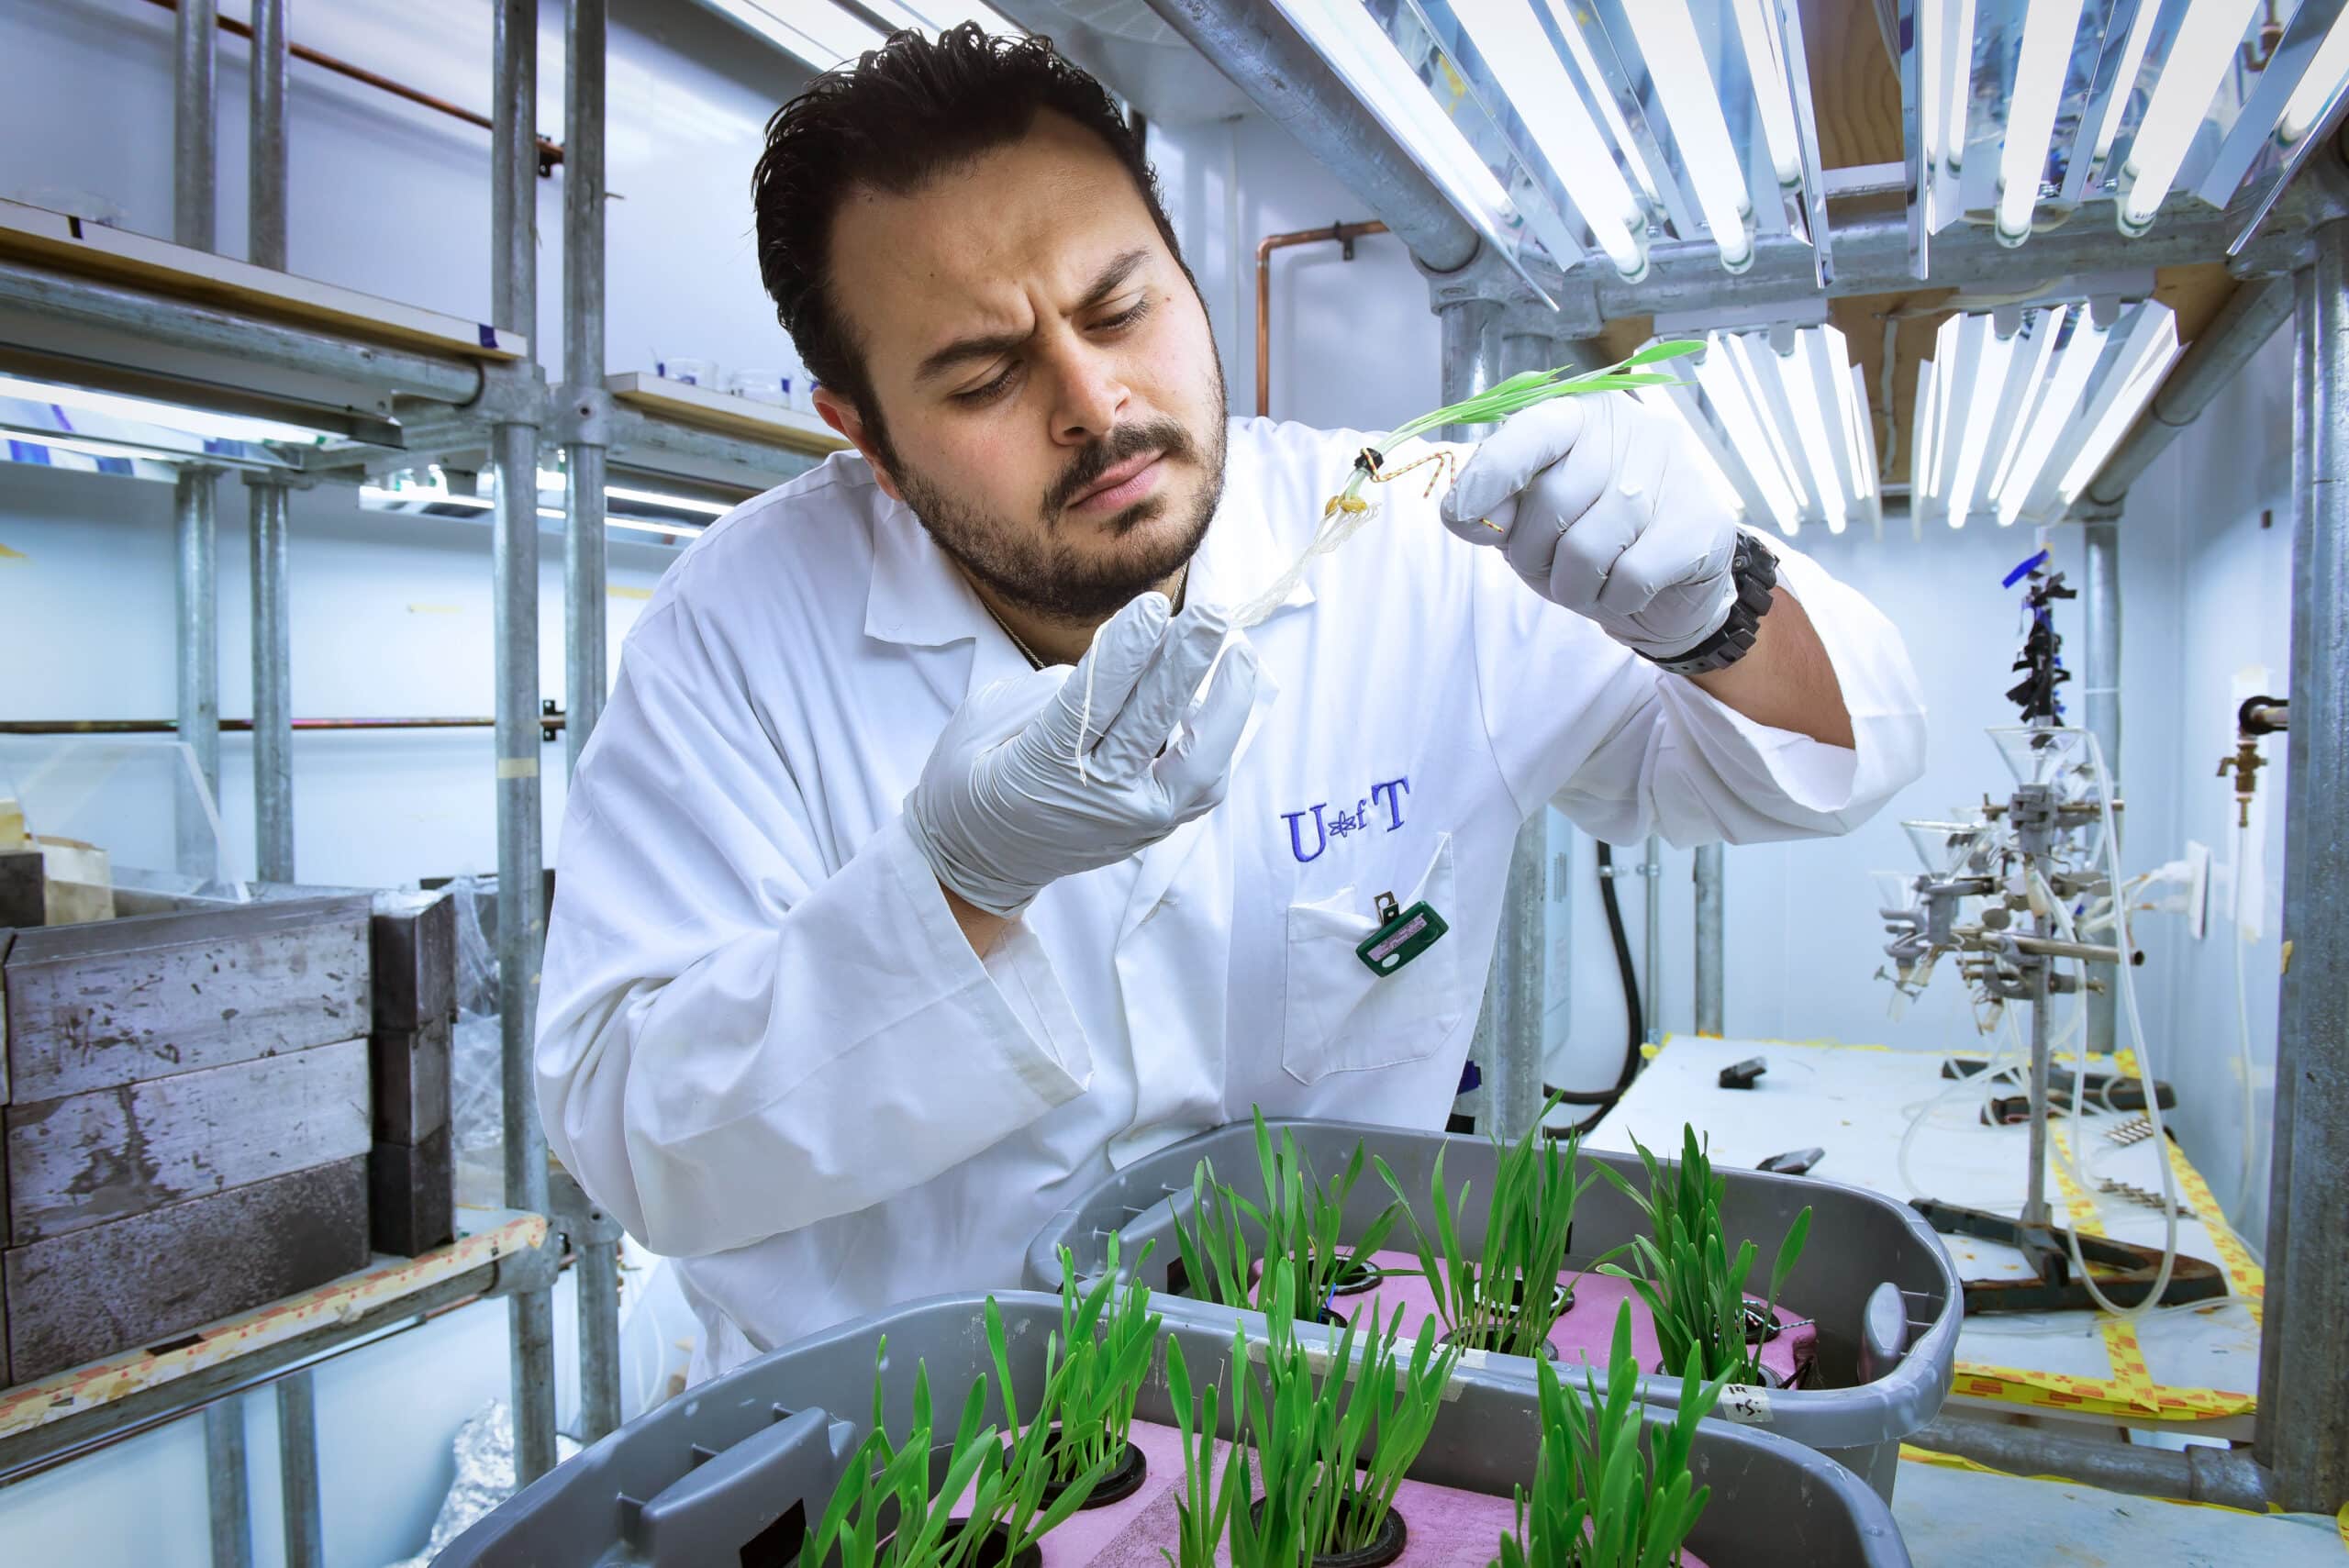 A scientist in a lab coat carefully tending to plants in a laboratory setting